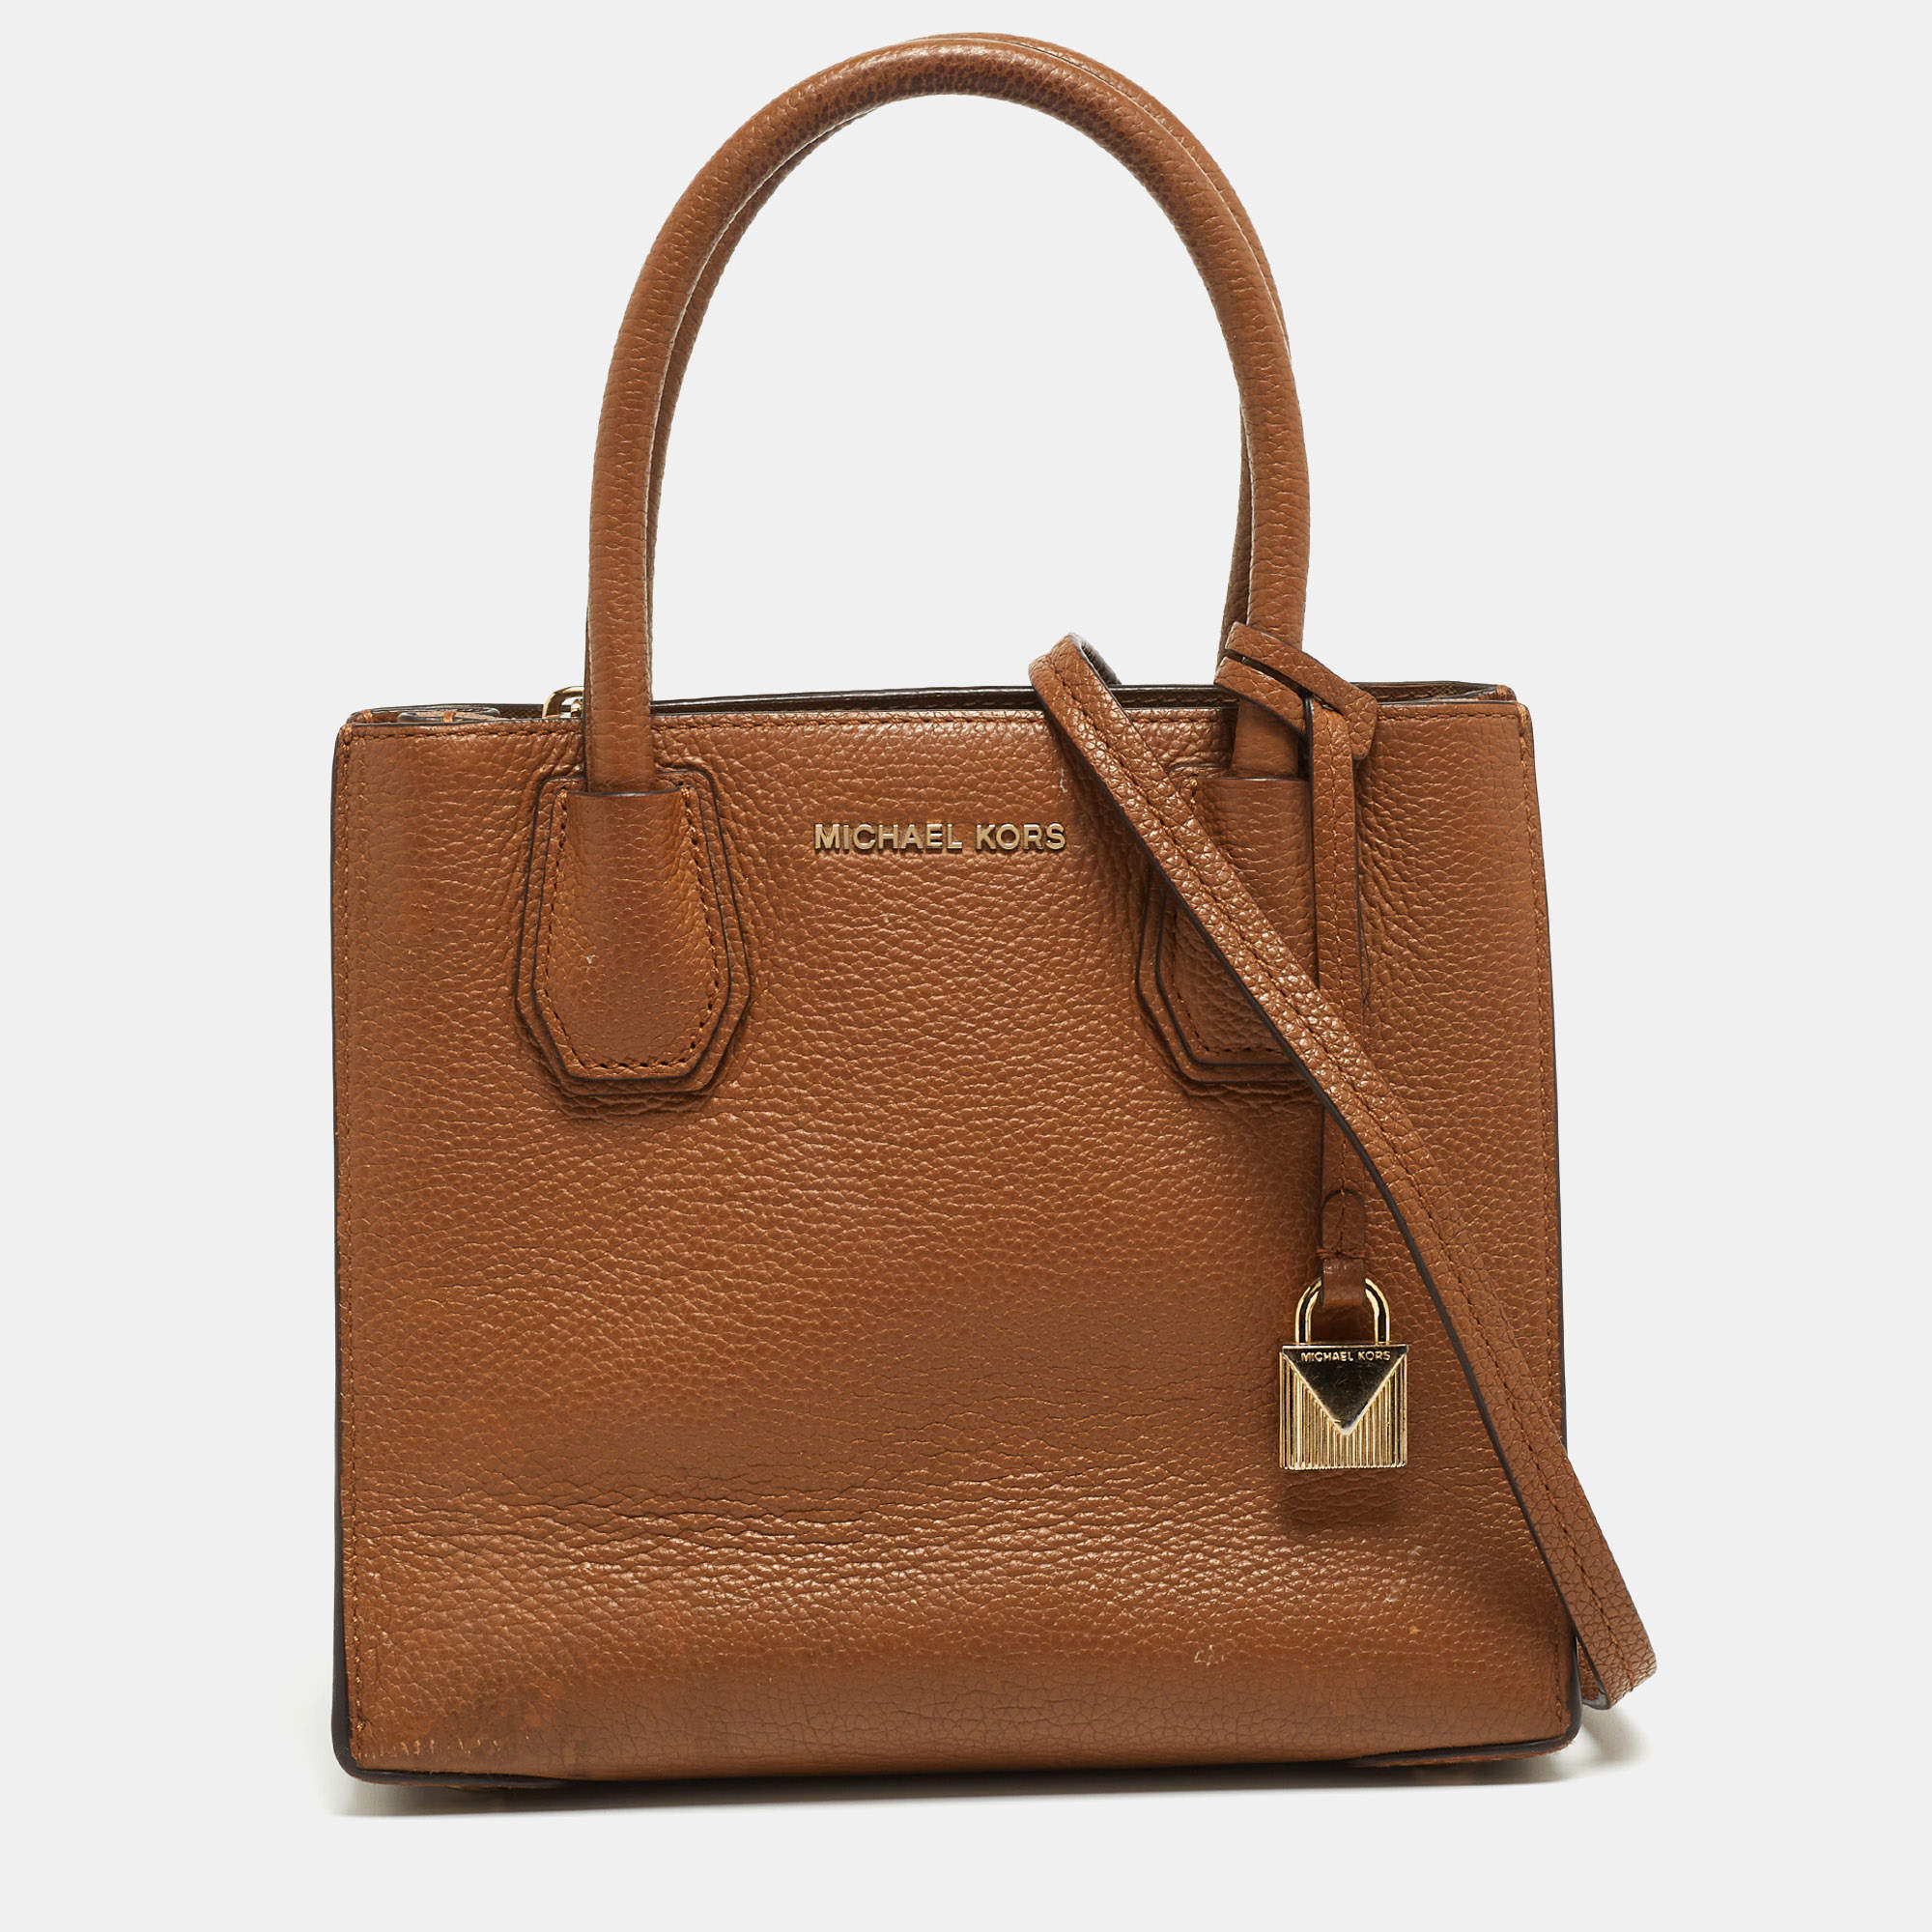 Michael Kors Brown Leather Small Mercer Tote